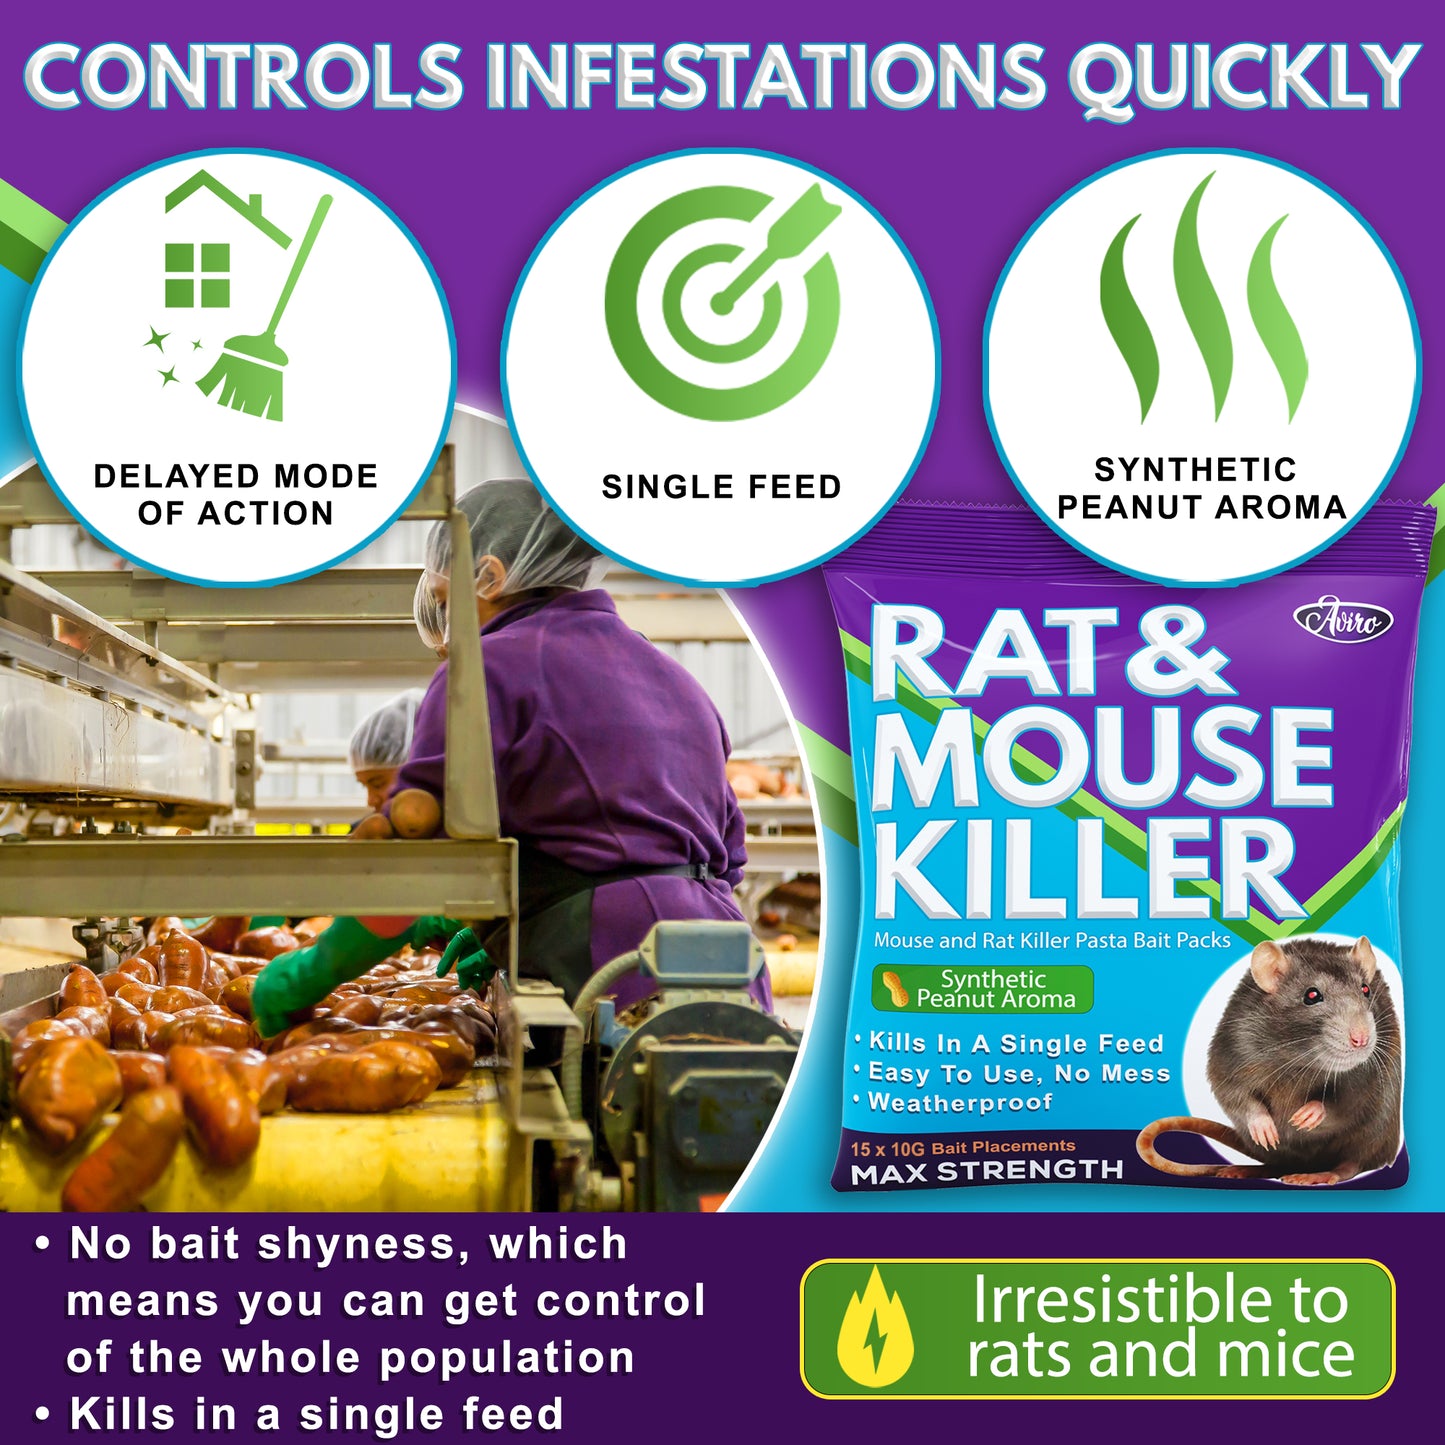 aviro-rat-and-mouse-killer-easy-fast-control